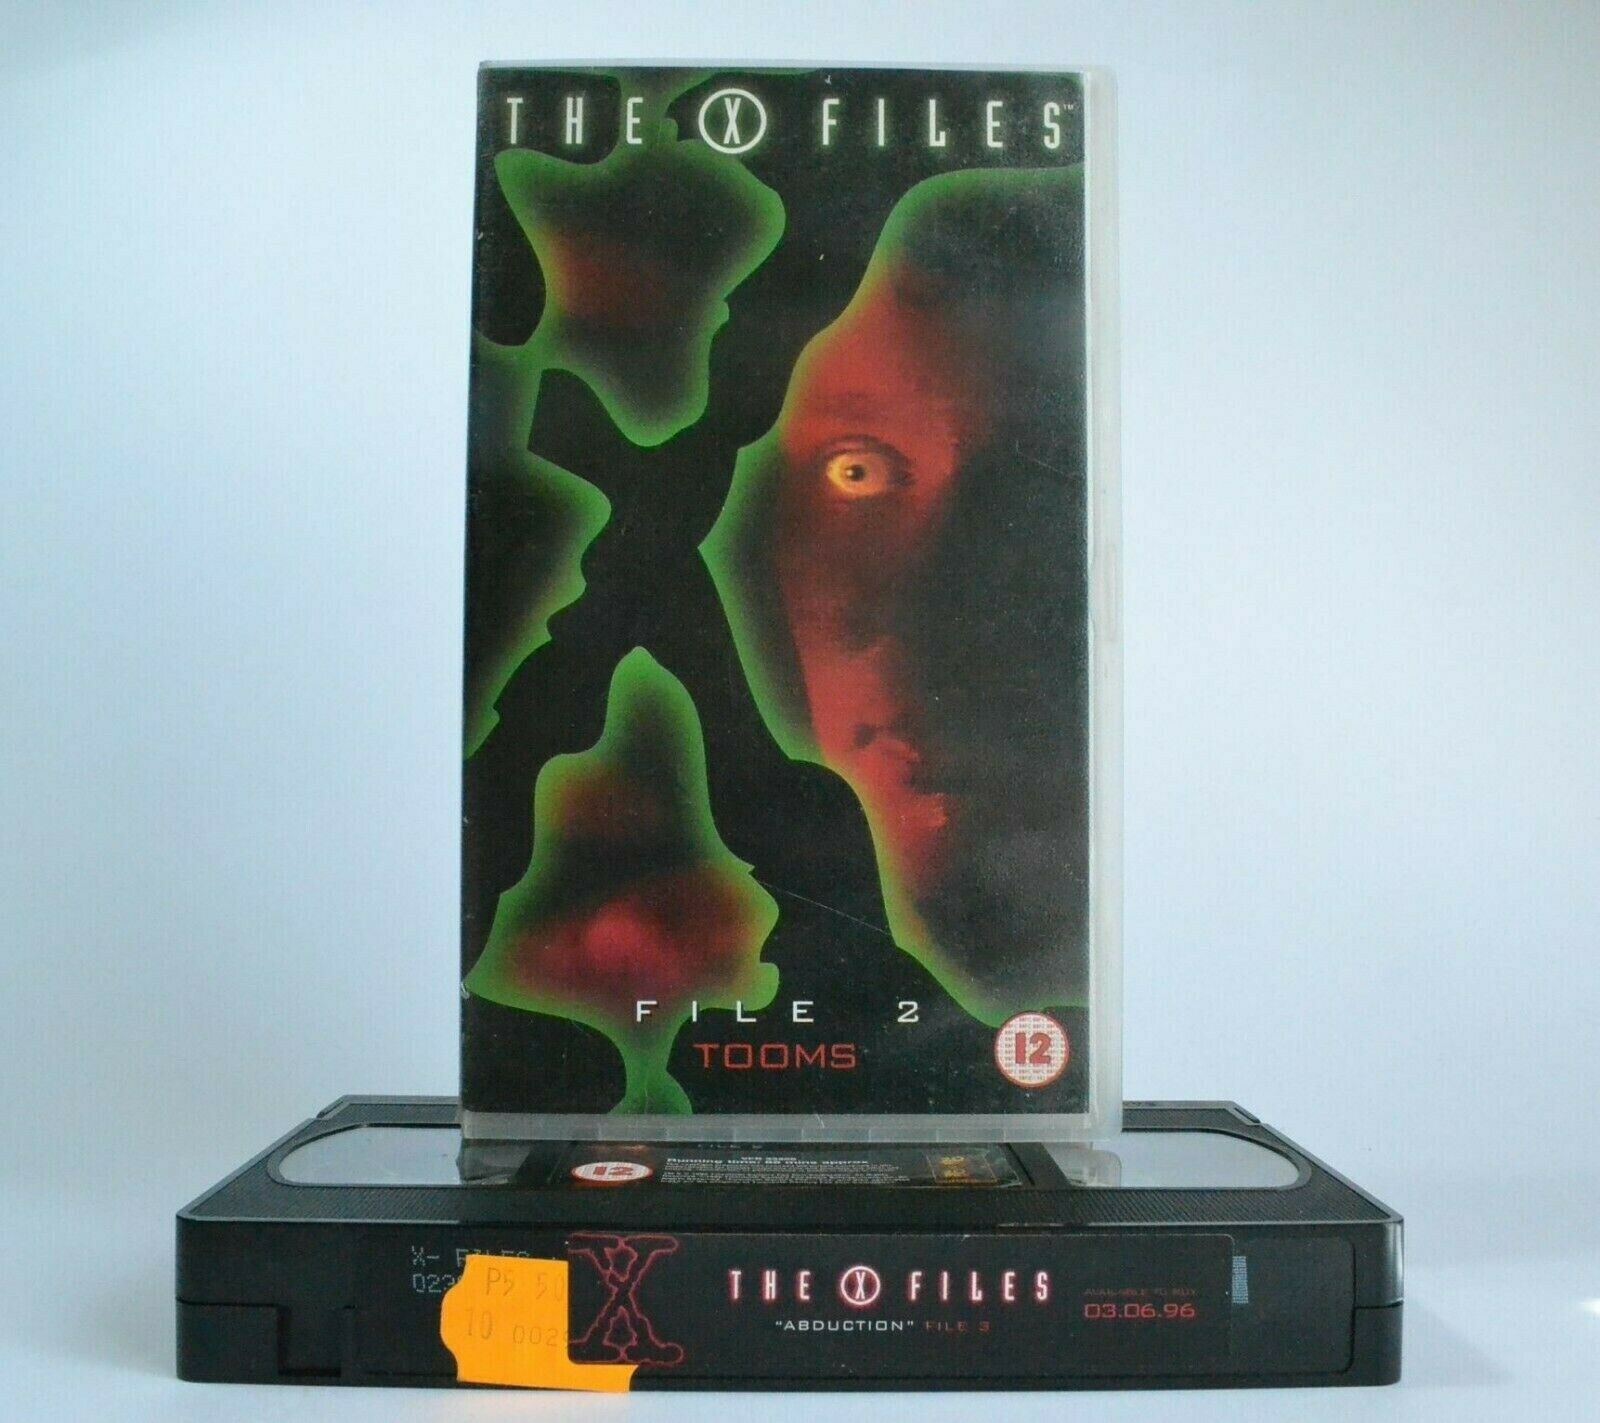 The X-Files: Tooms (1995) - Sci-Fi TV Series - The Truth Is Out There - Pal VHS-